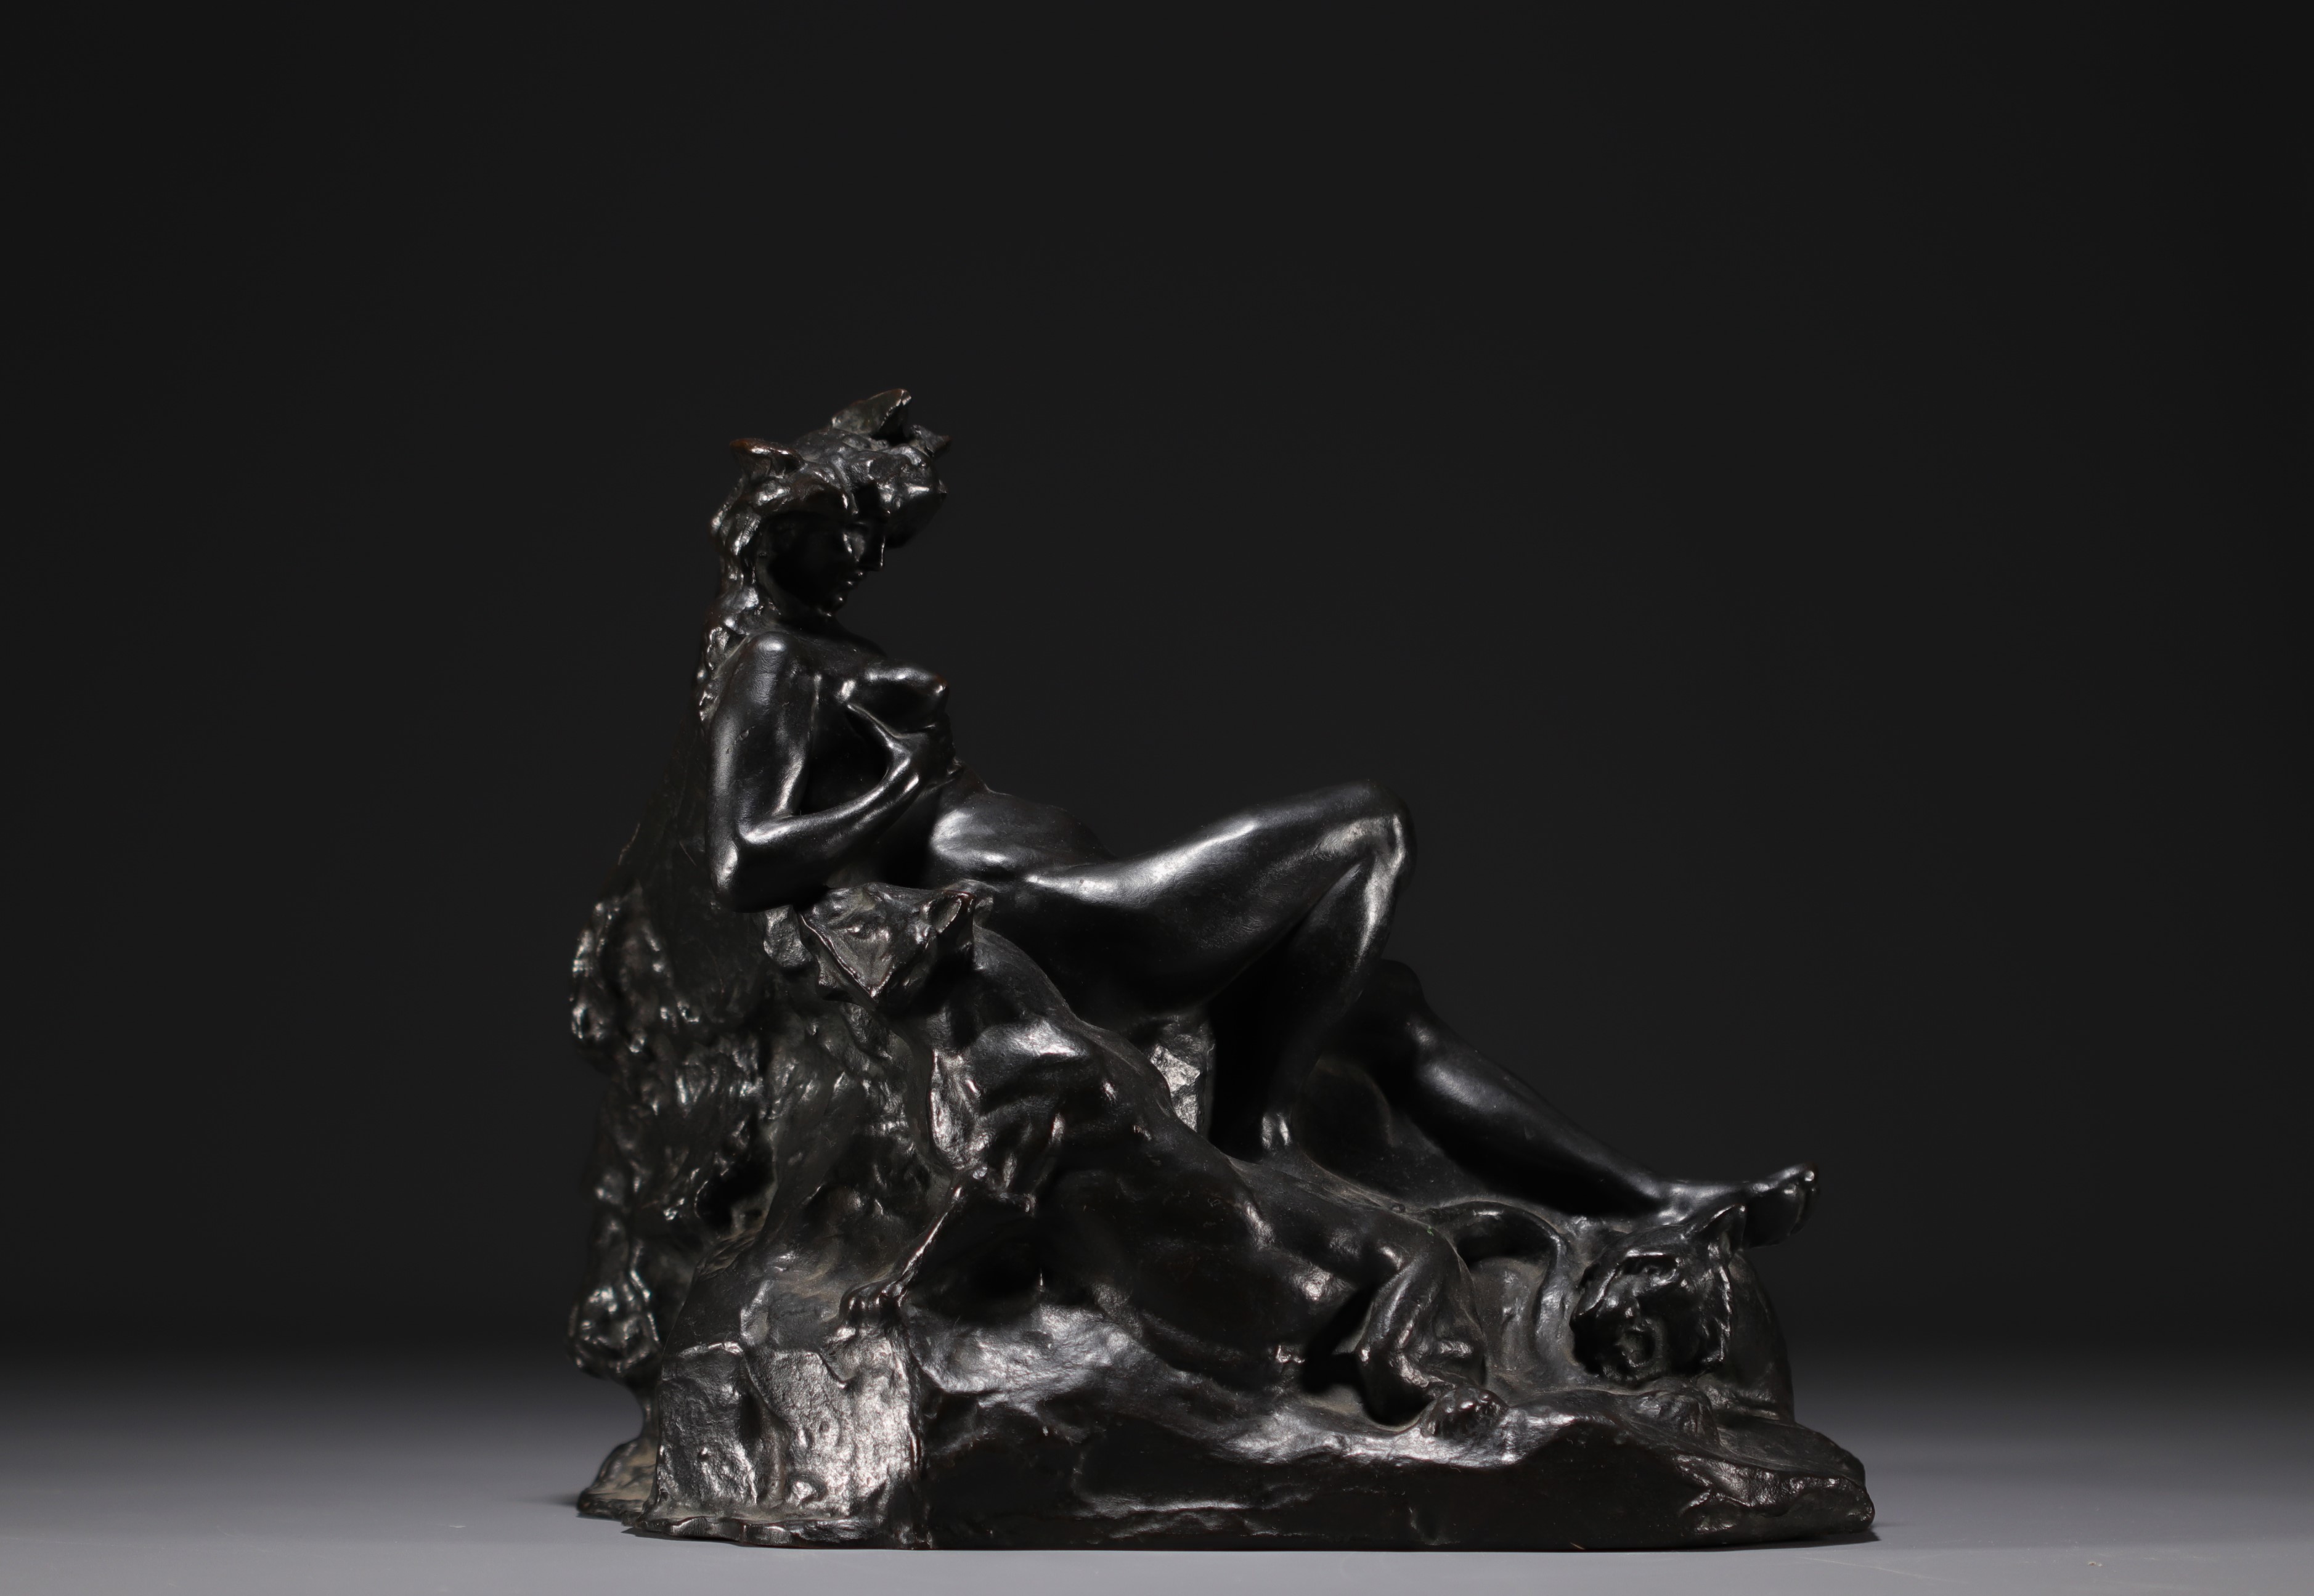 Auguste PUTTEMANS (1866-1922) "Jeune femme nue a la pantheres" Sculpture in bronze with black patina - Image 5 of 6